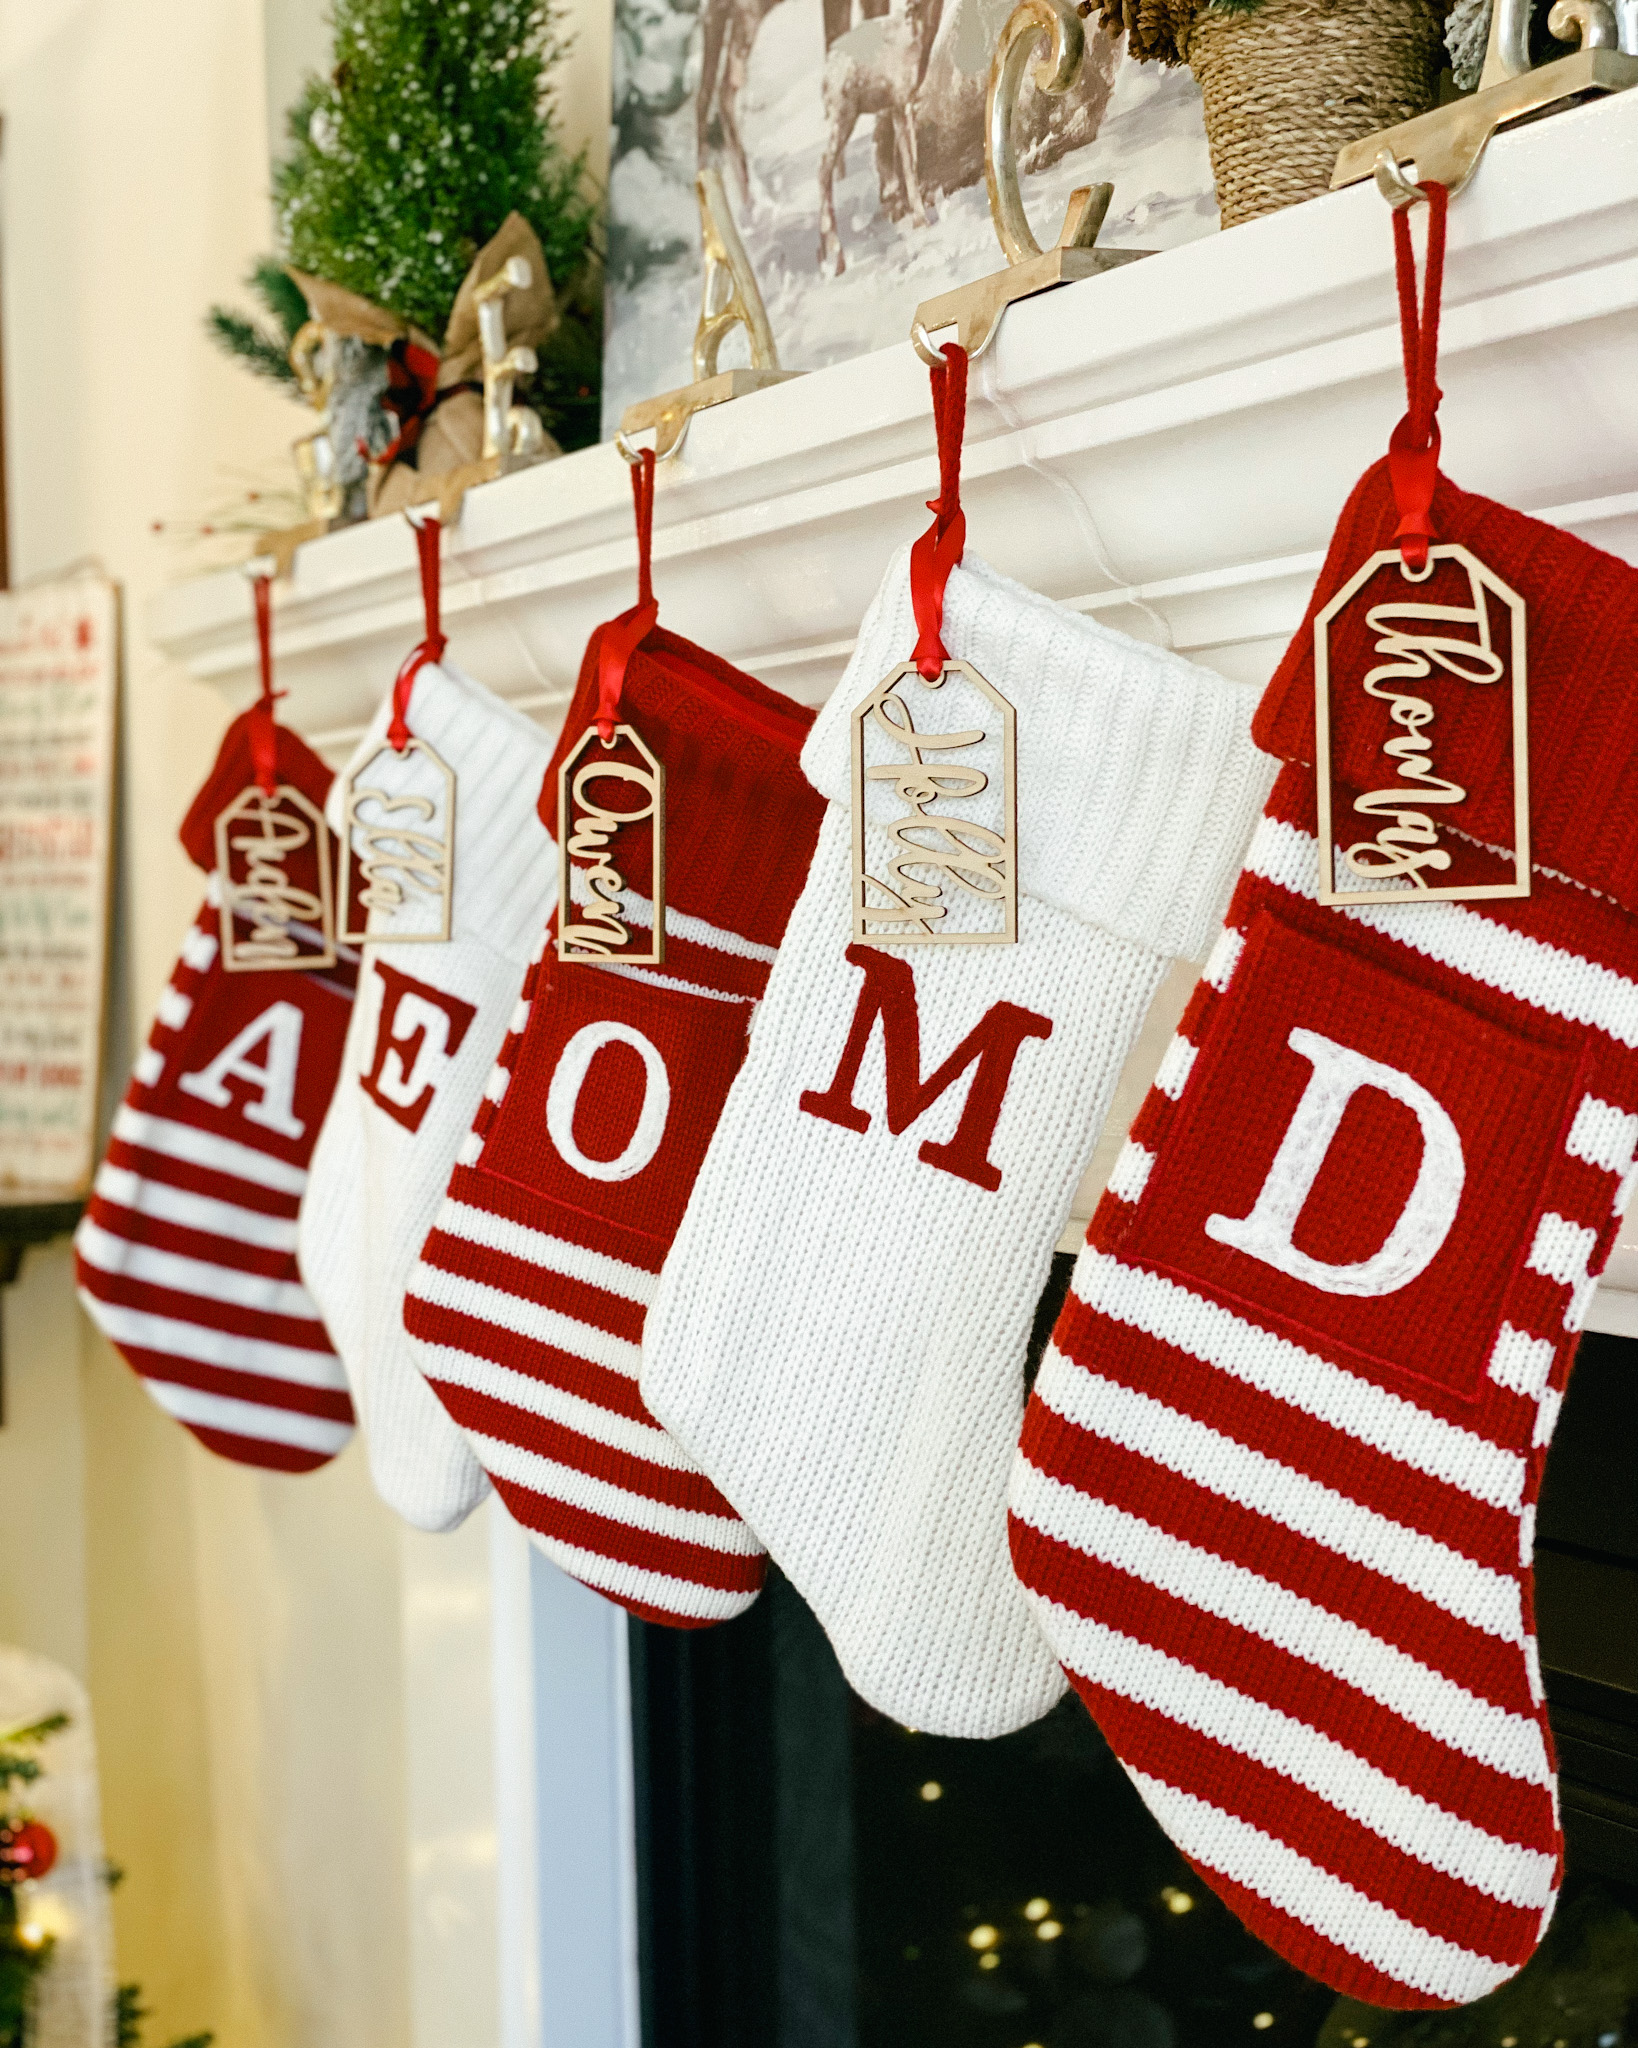 hollys stockings, home stockings, family stockings, red and cream striped stockings, cream stockings, name tags 